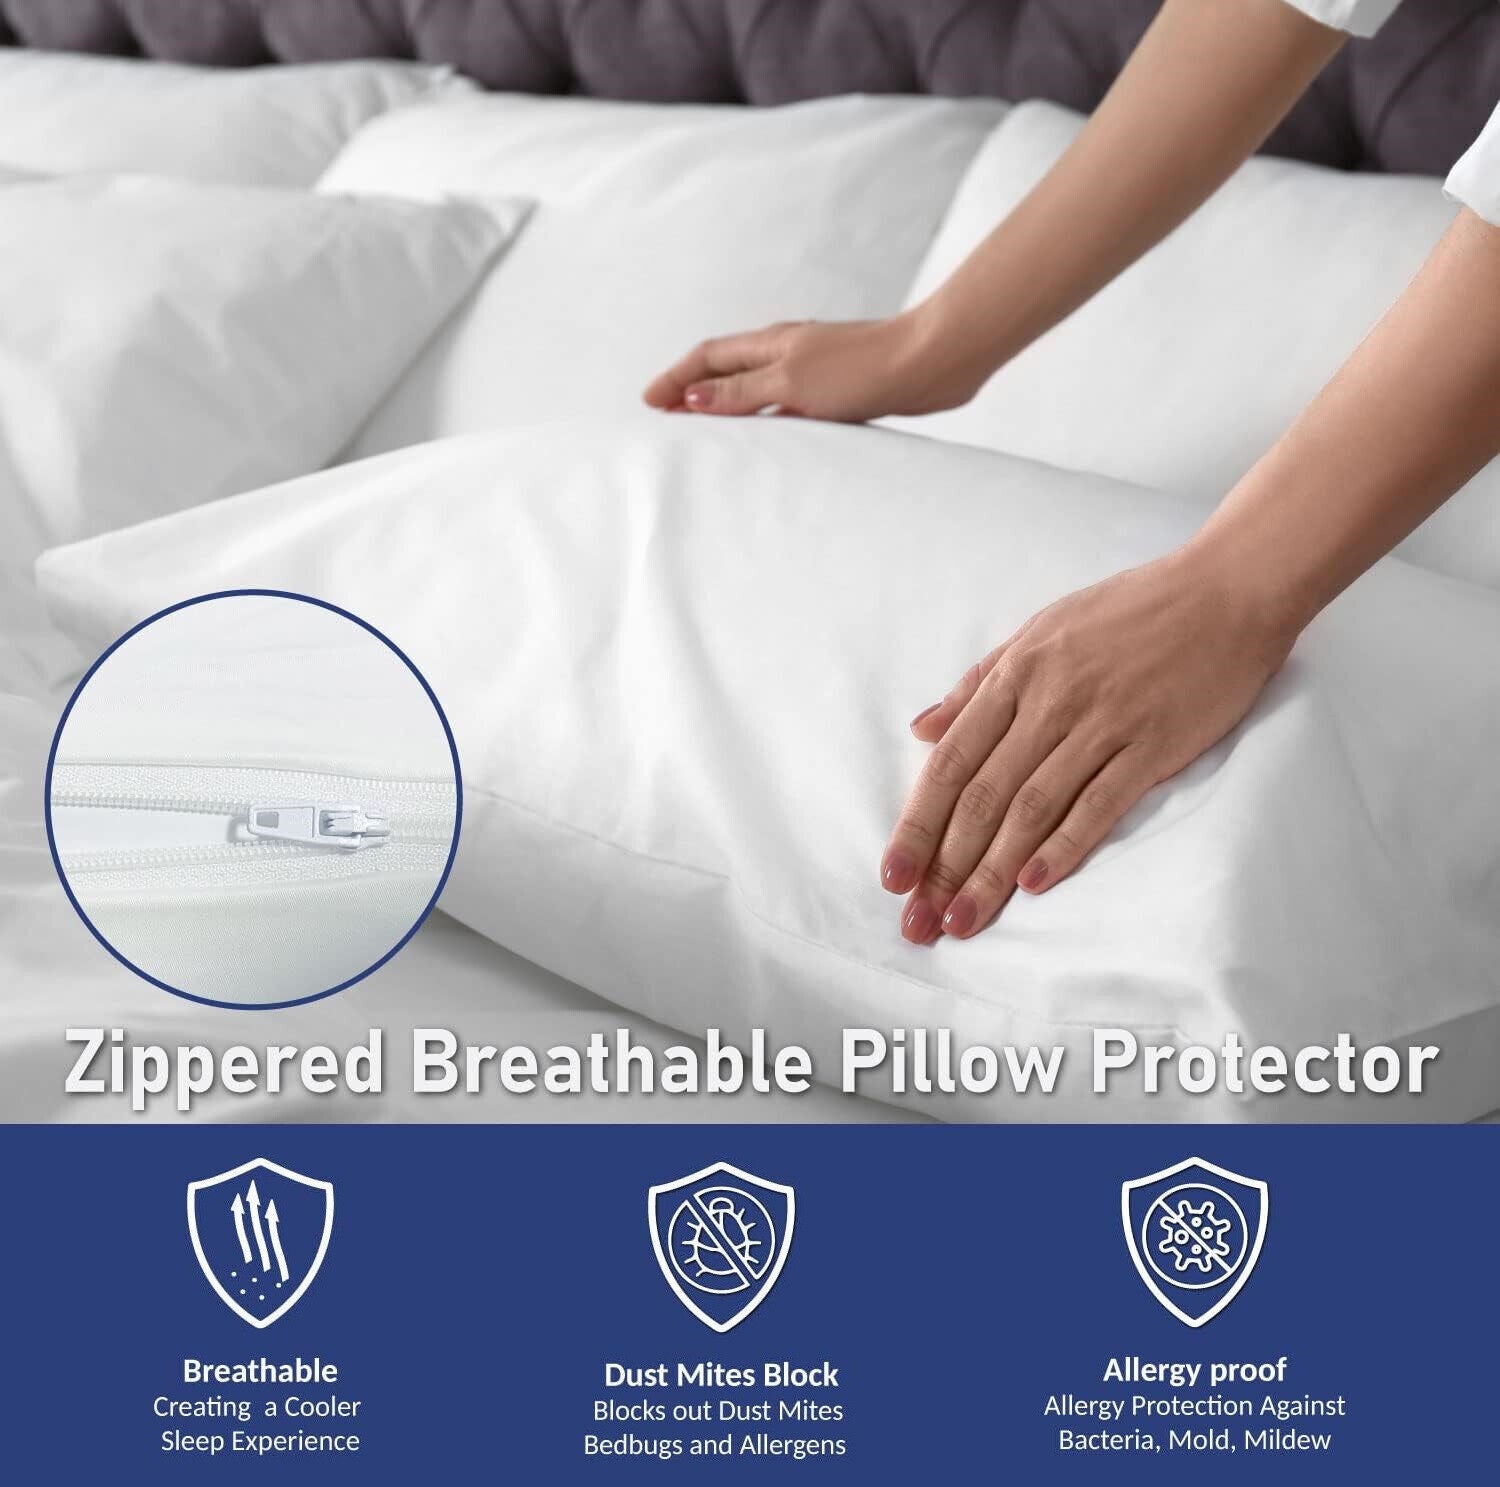 Zippered breathable pillow protector